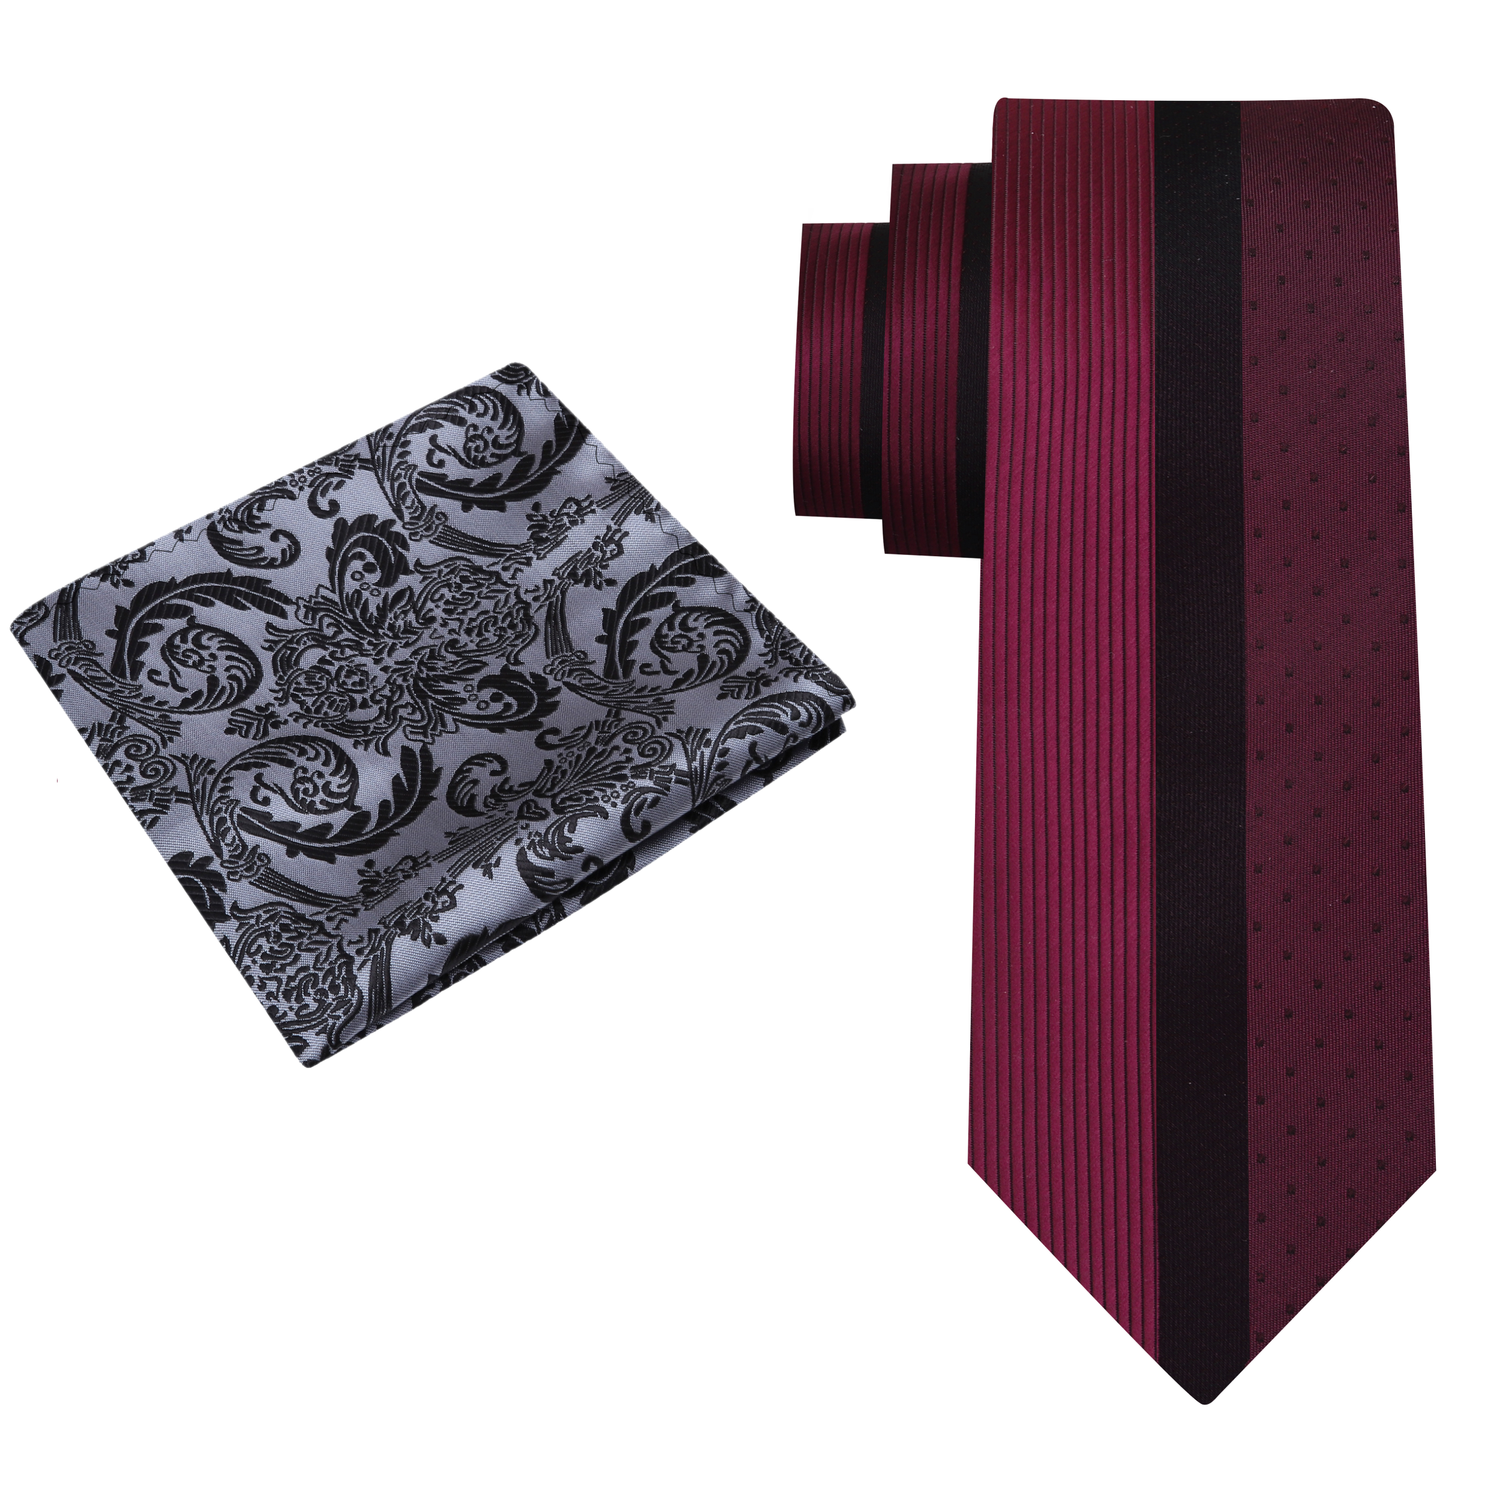 Alt View: Burgundy and Black Lined Necktie and Grey, Black Floral Square